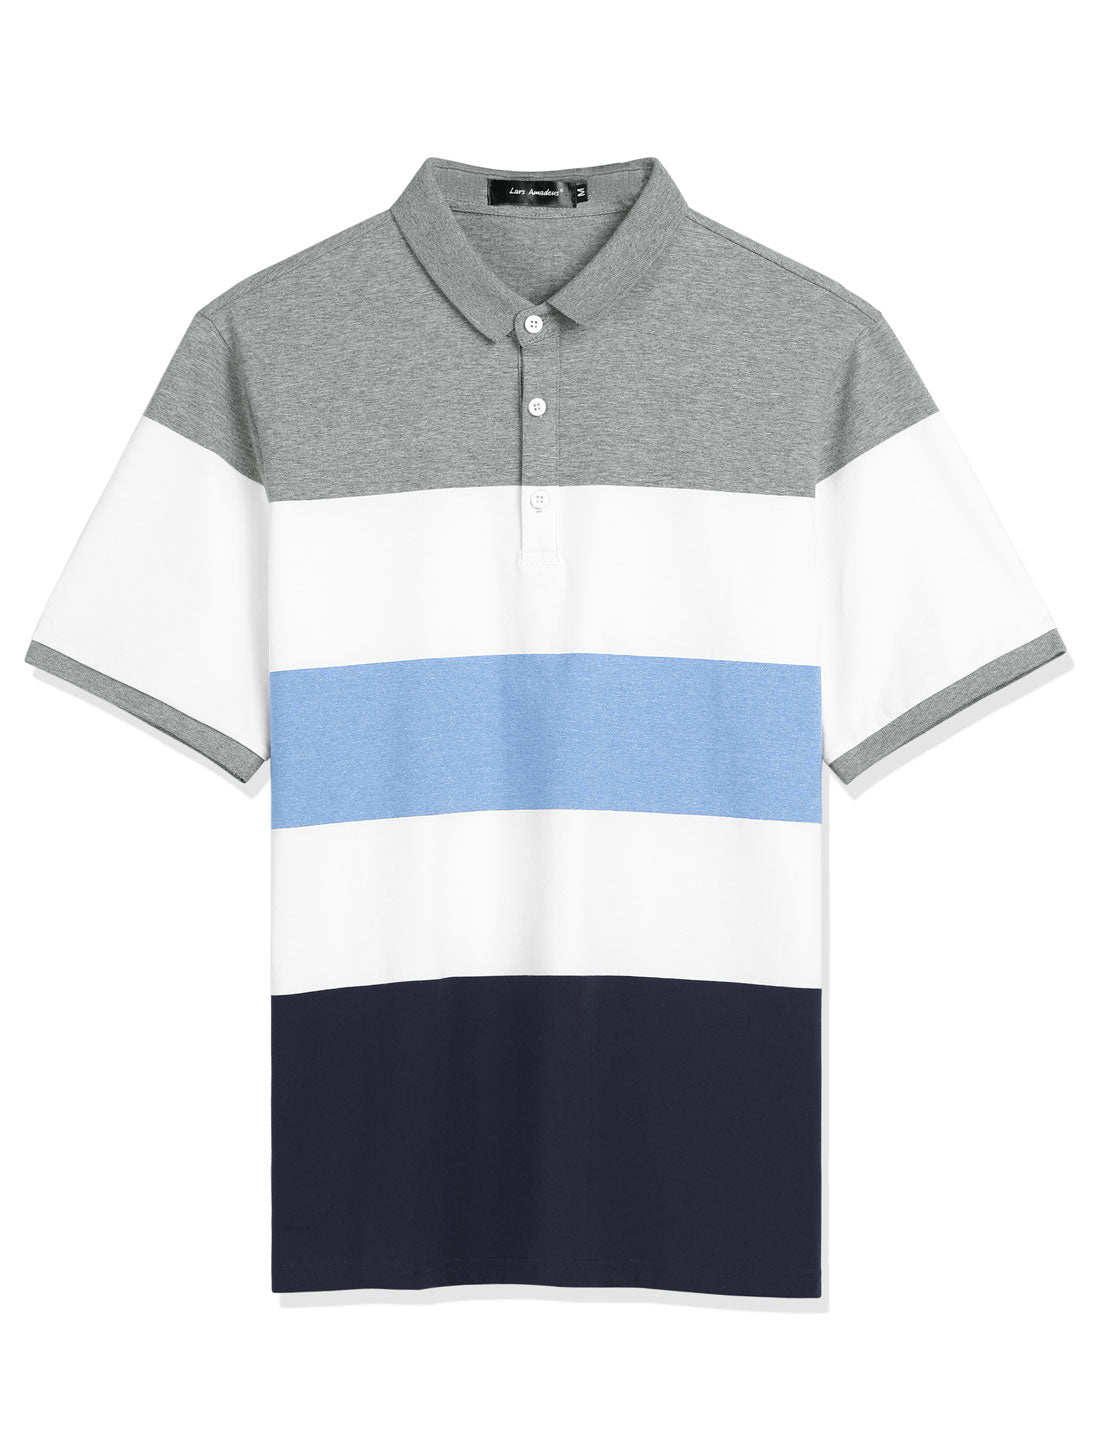 Bublédon Casual Summer Contrast Color Striped Polo T-Shirt